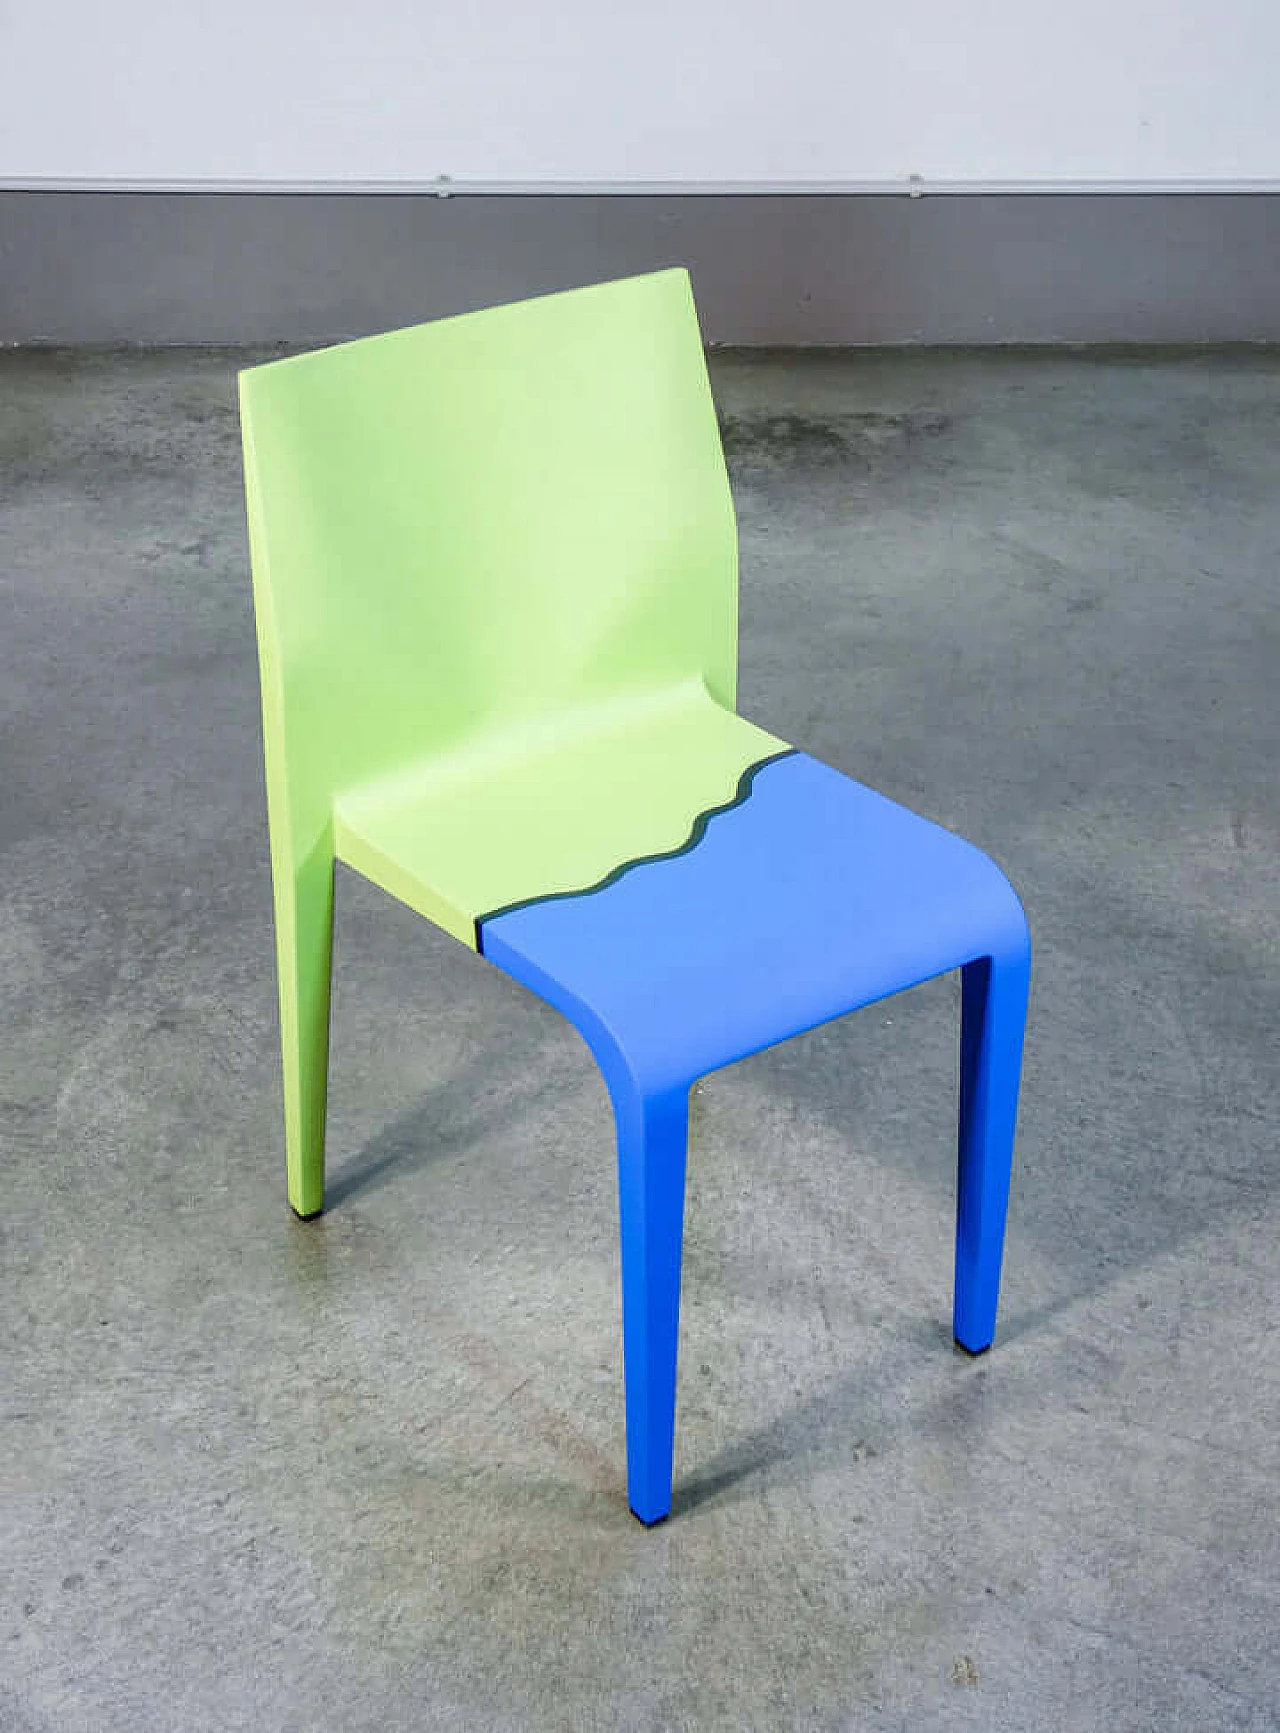 Laleggera 44 chair by Riccardo Blumer for Alias painted by Michelangelo Pistoletto, 2009 1